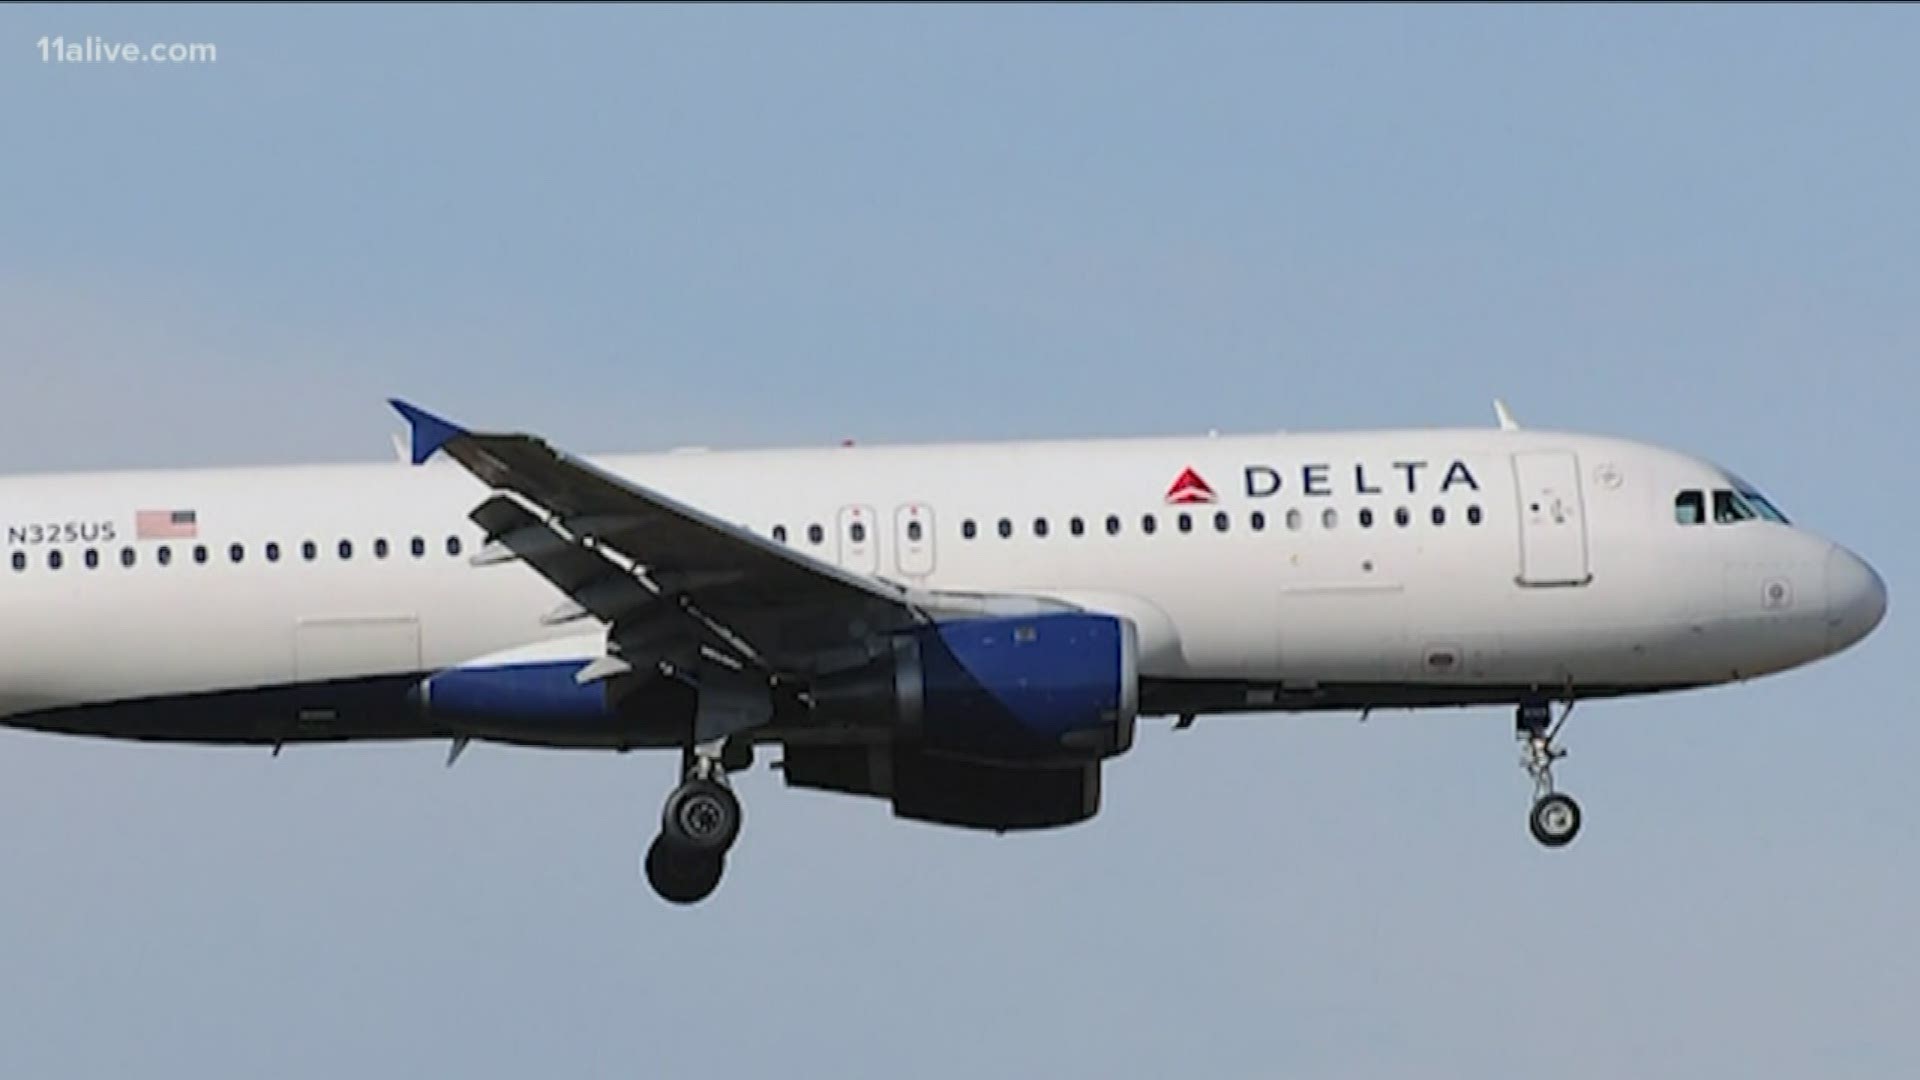 The Atlanta Business Chronicle reports that Delta says they have not found a solution to allow them on flights.